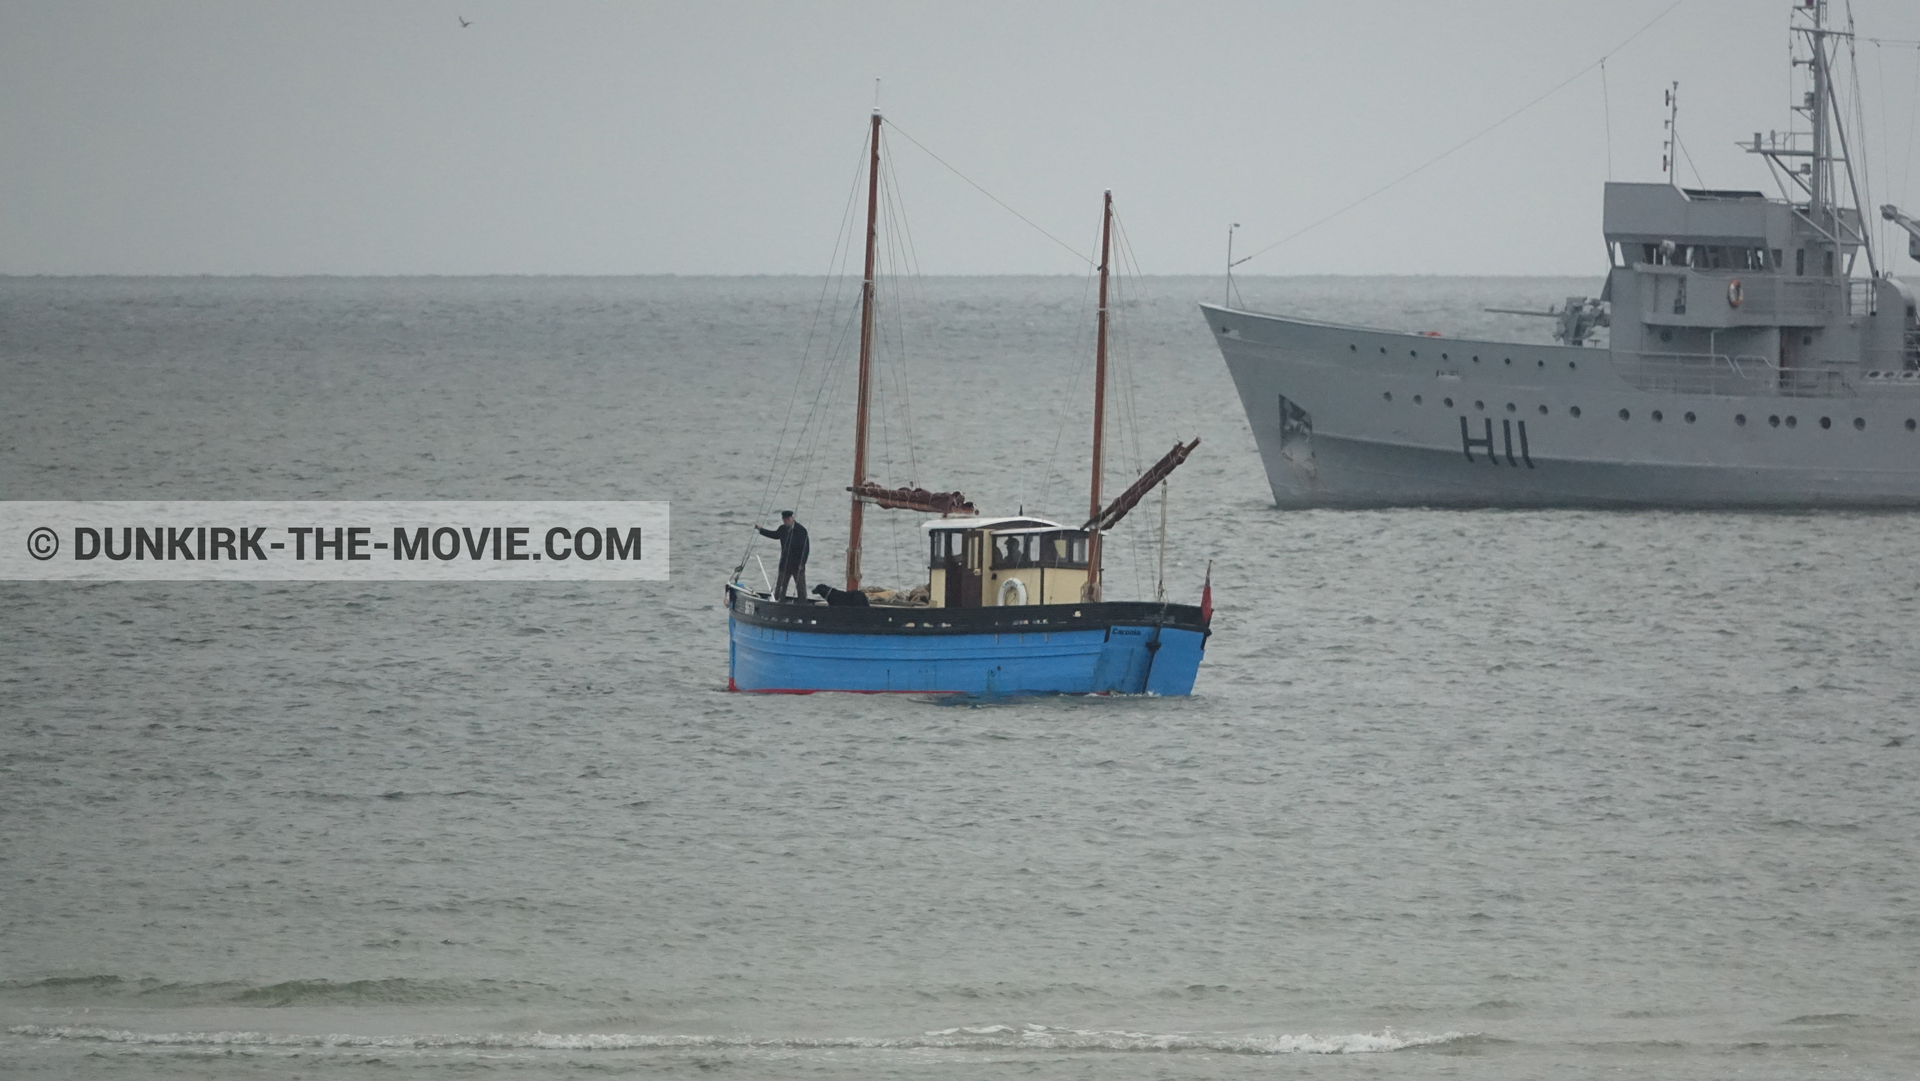 Picture with boat, H11 - MLV Castor,  from behind the scene of the Dunkirk movie by Nolan